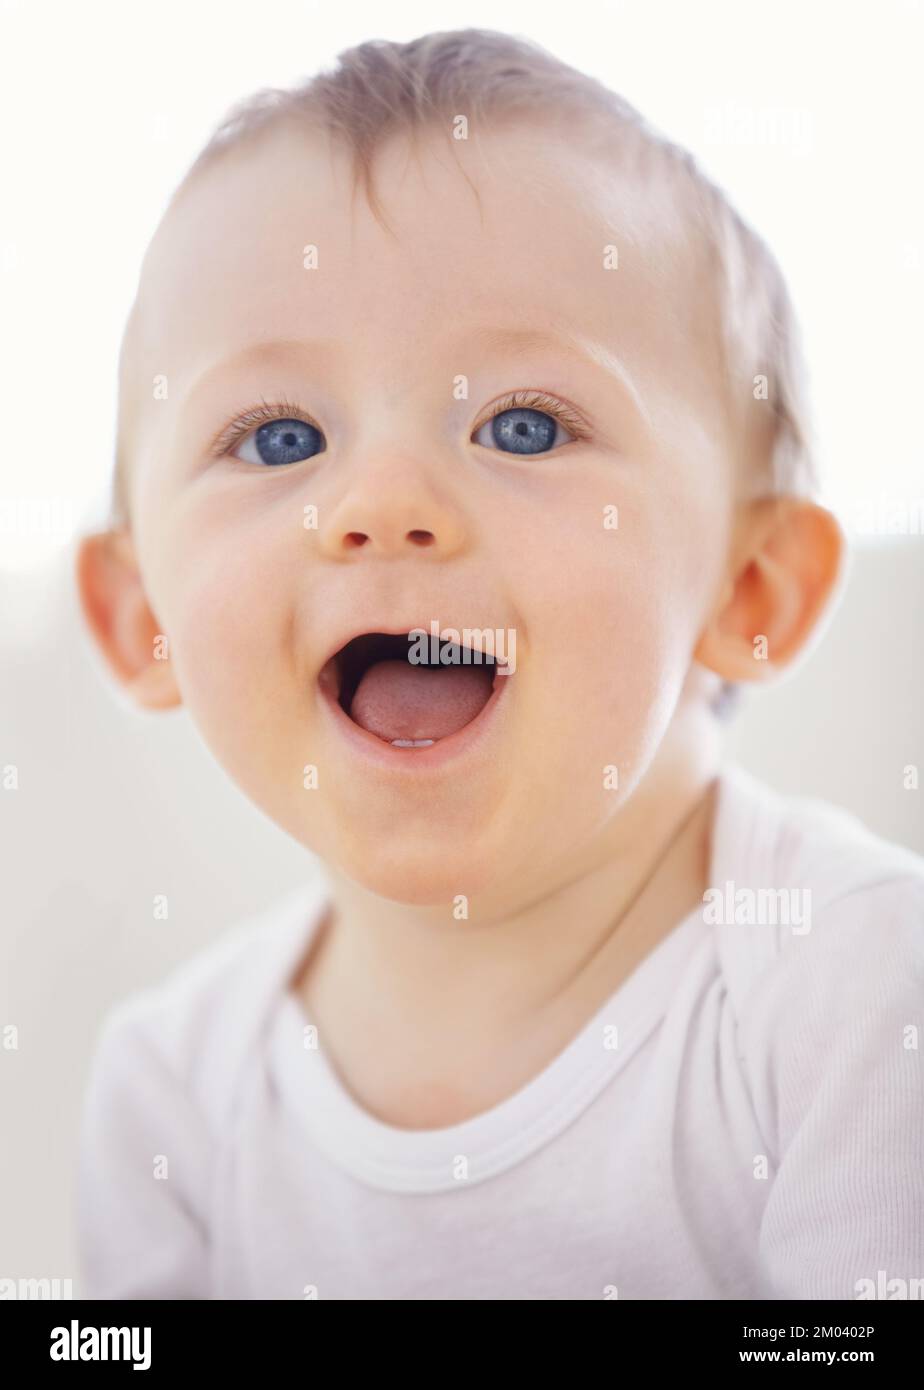 Hes a bundle of laughs. Portrait of an adorable baby boy laughing. Stock Photo